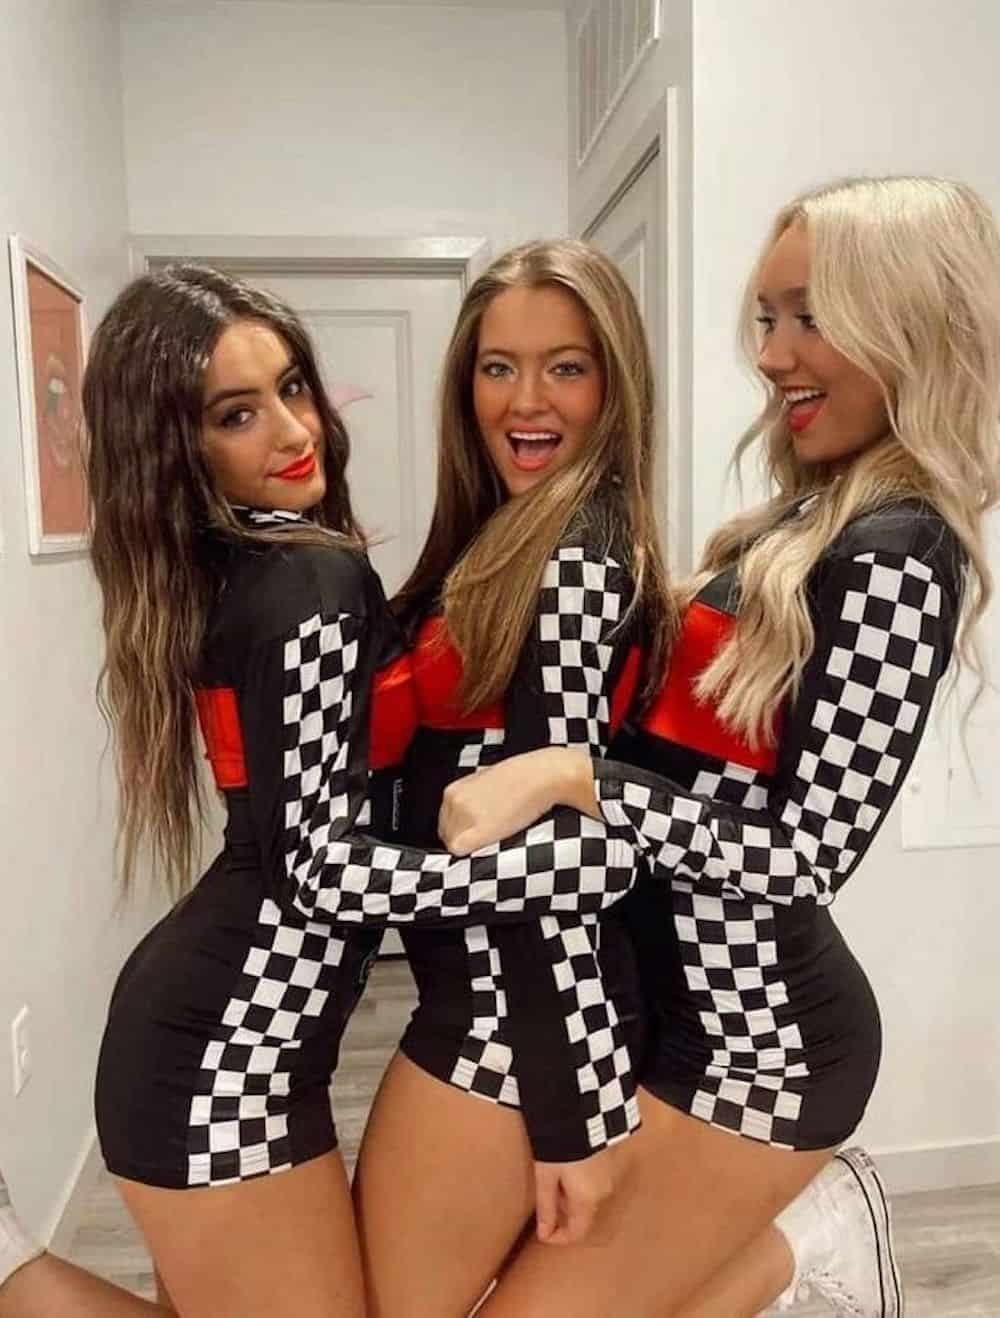 Three women dressed up as race car pit crew on Halloween.